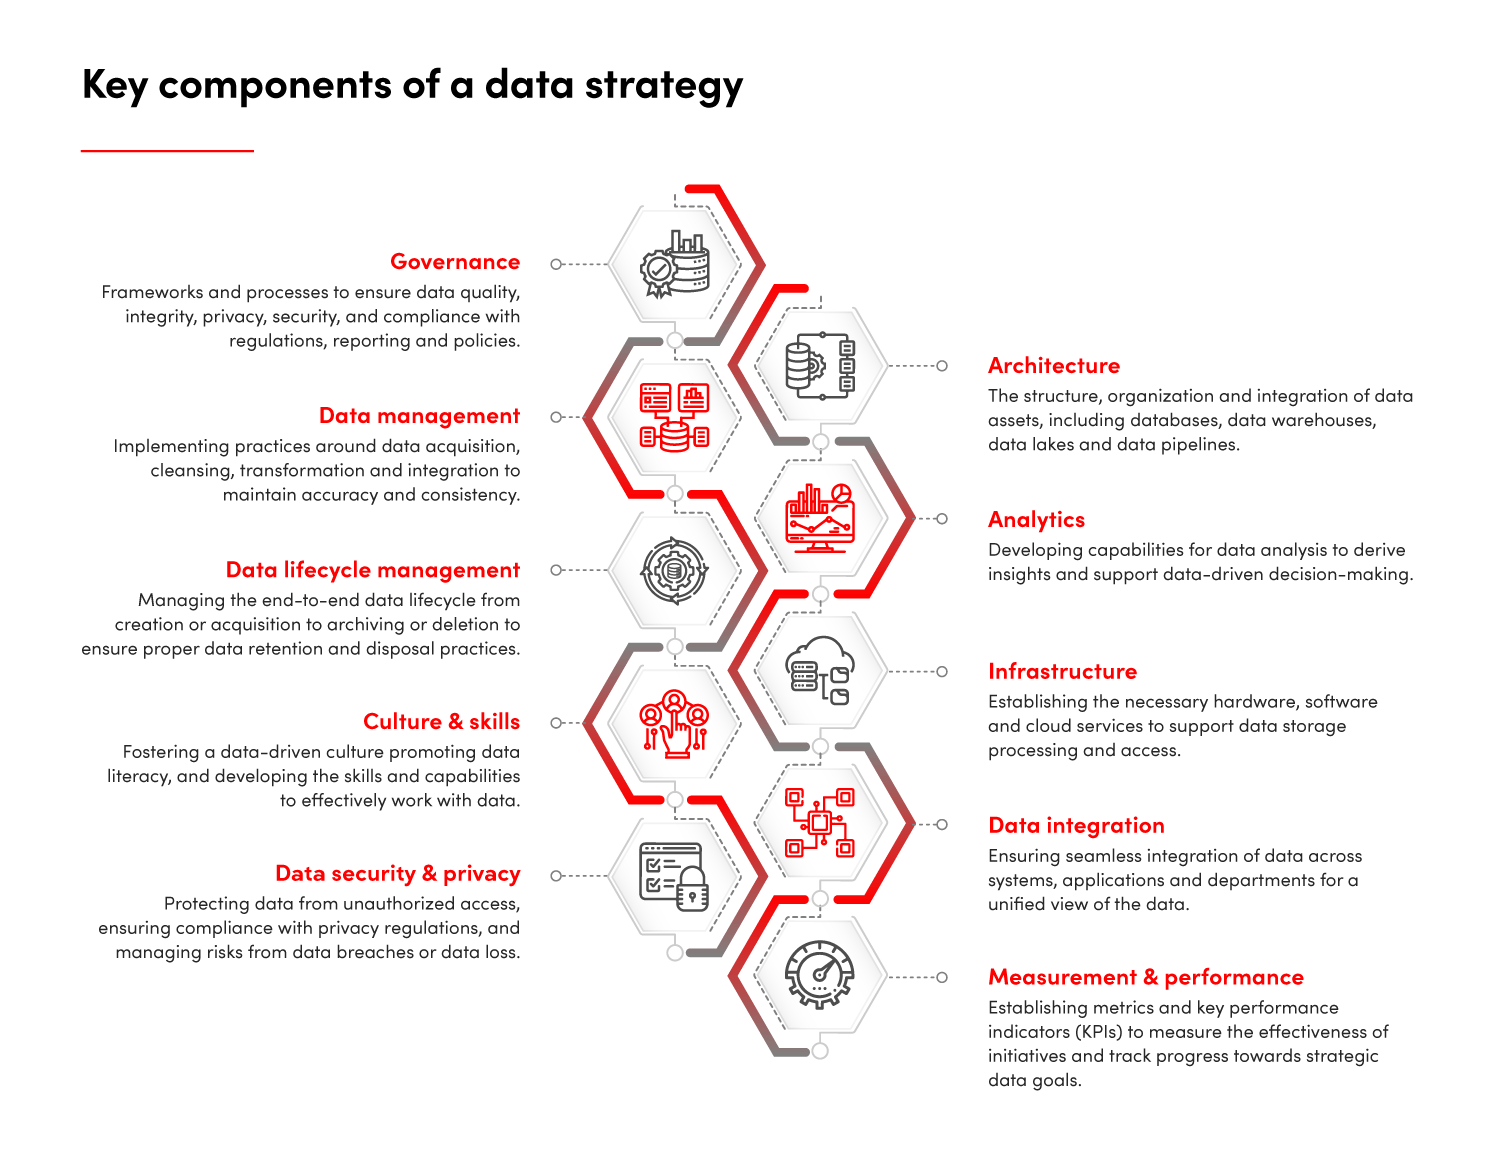 Key components of a data strategy